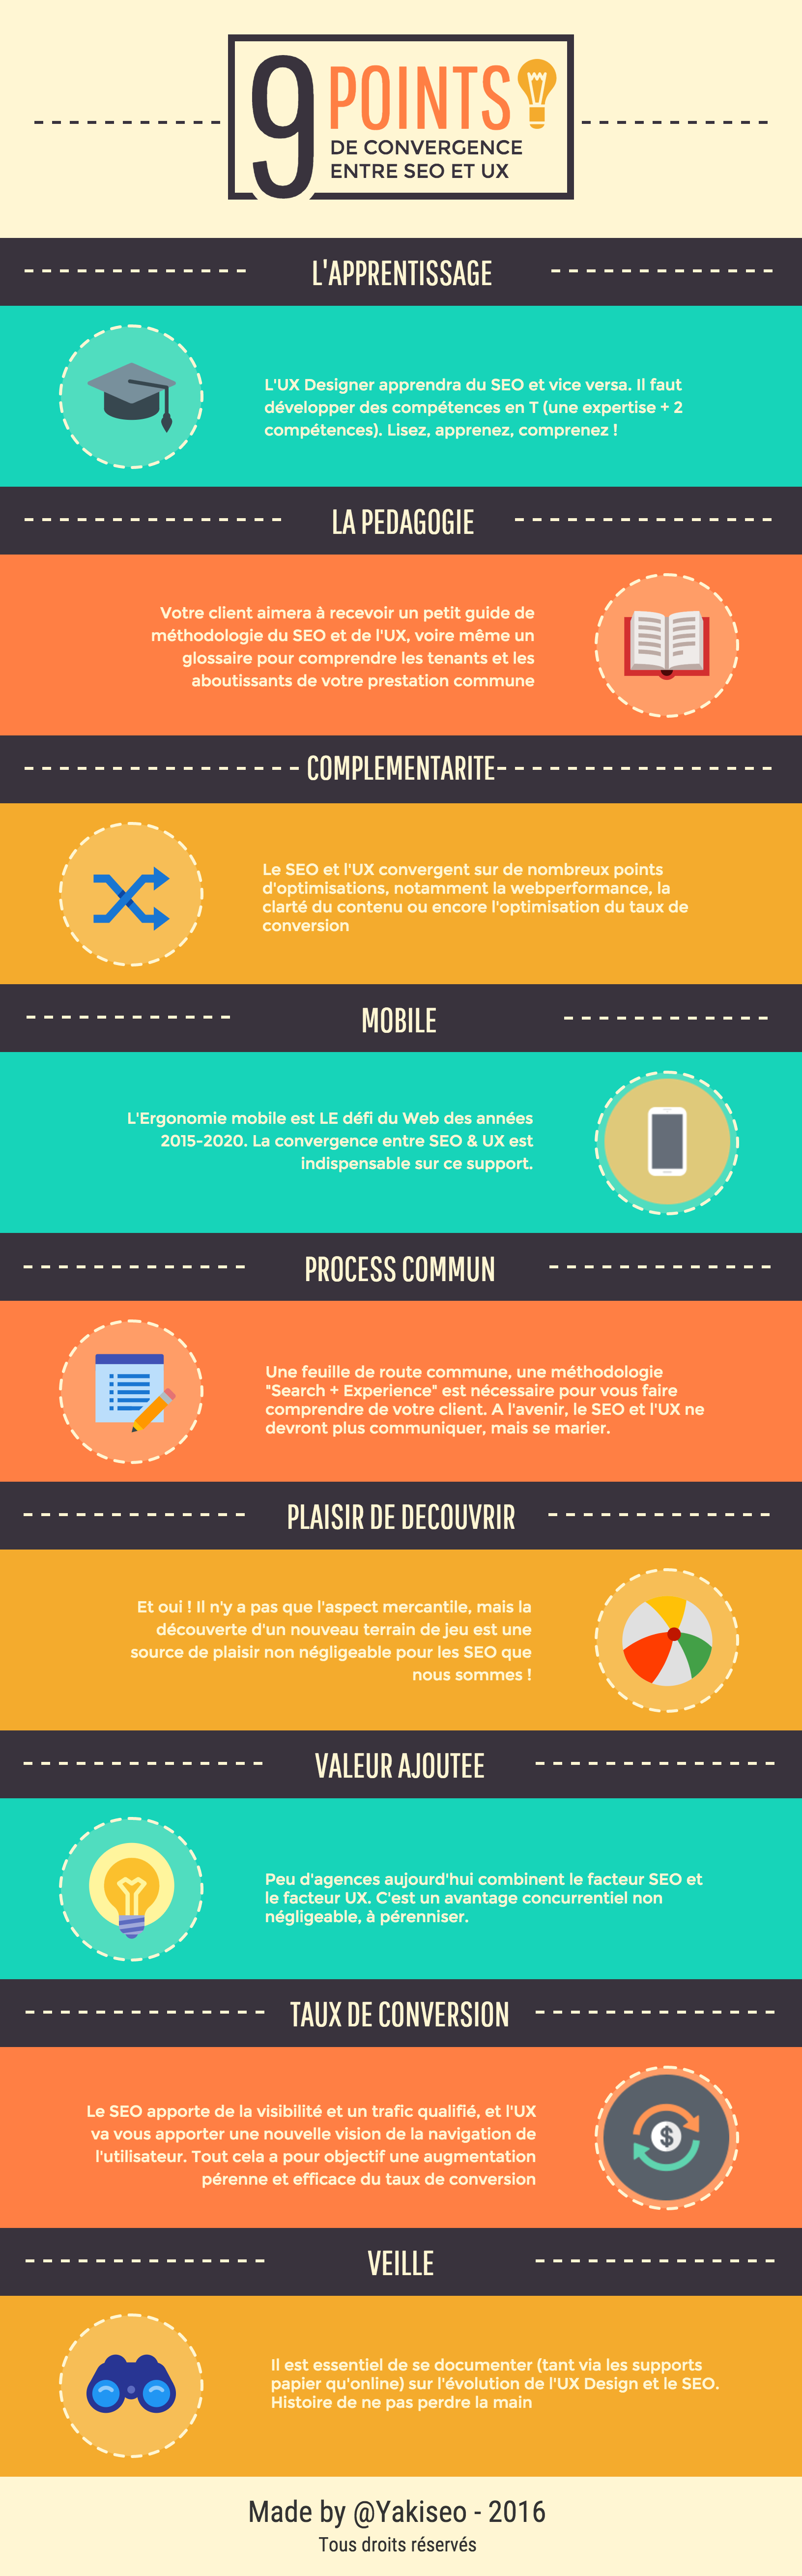 infographie-convergence-seo-ux